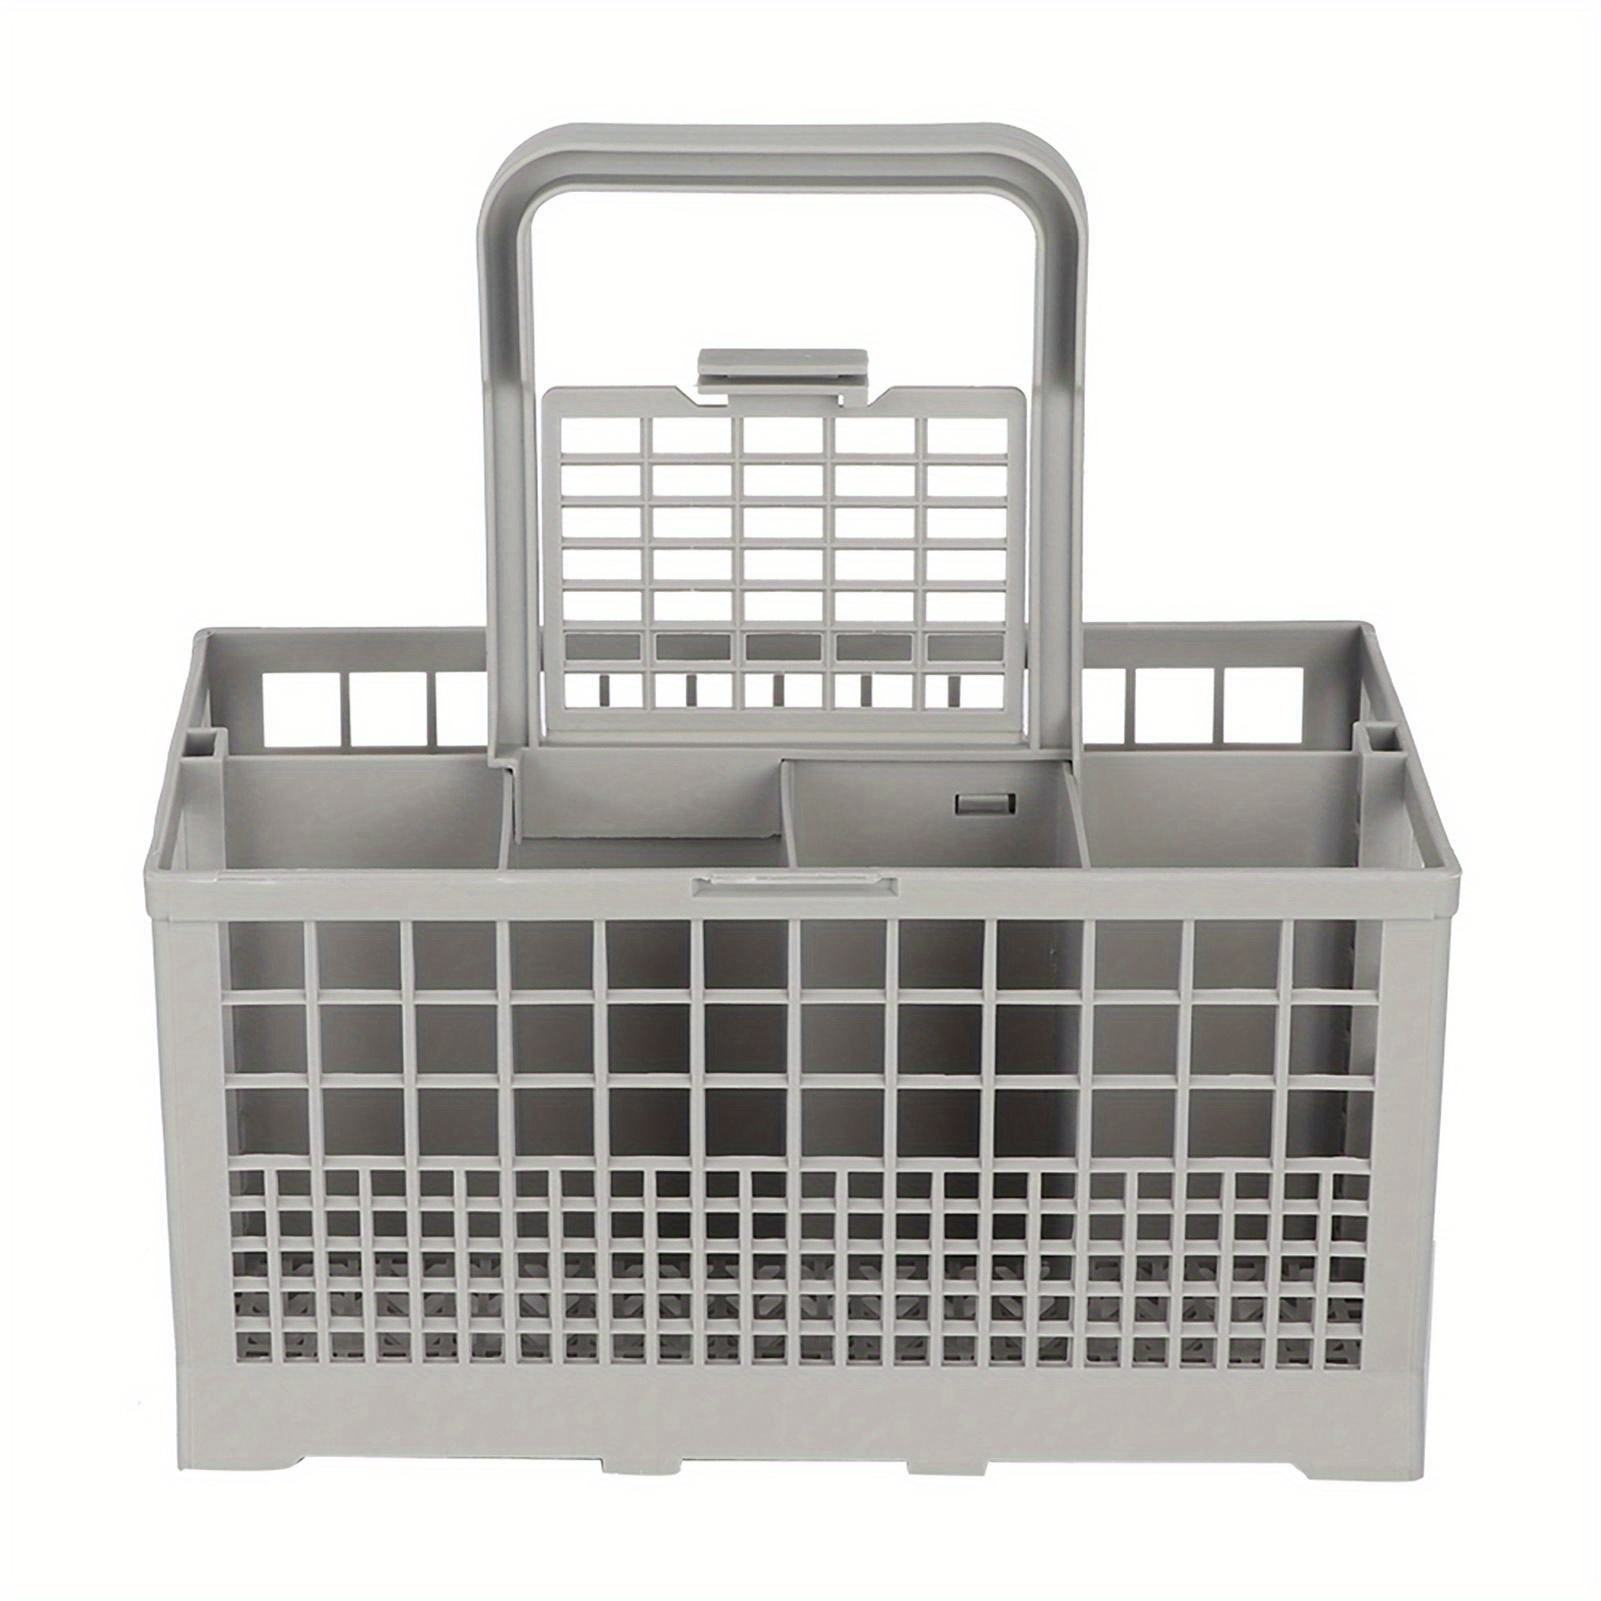 

Universal Cutlery Basket Replacement Box For Multipurpose Dishwashers Abs Material 7 Compartment Silverware And Firm For Ge Suitable For Full Size Dishwashers